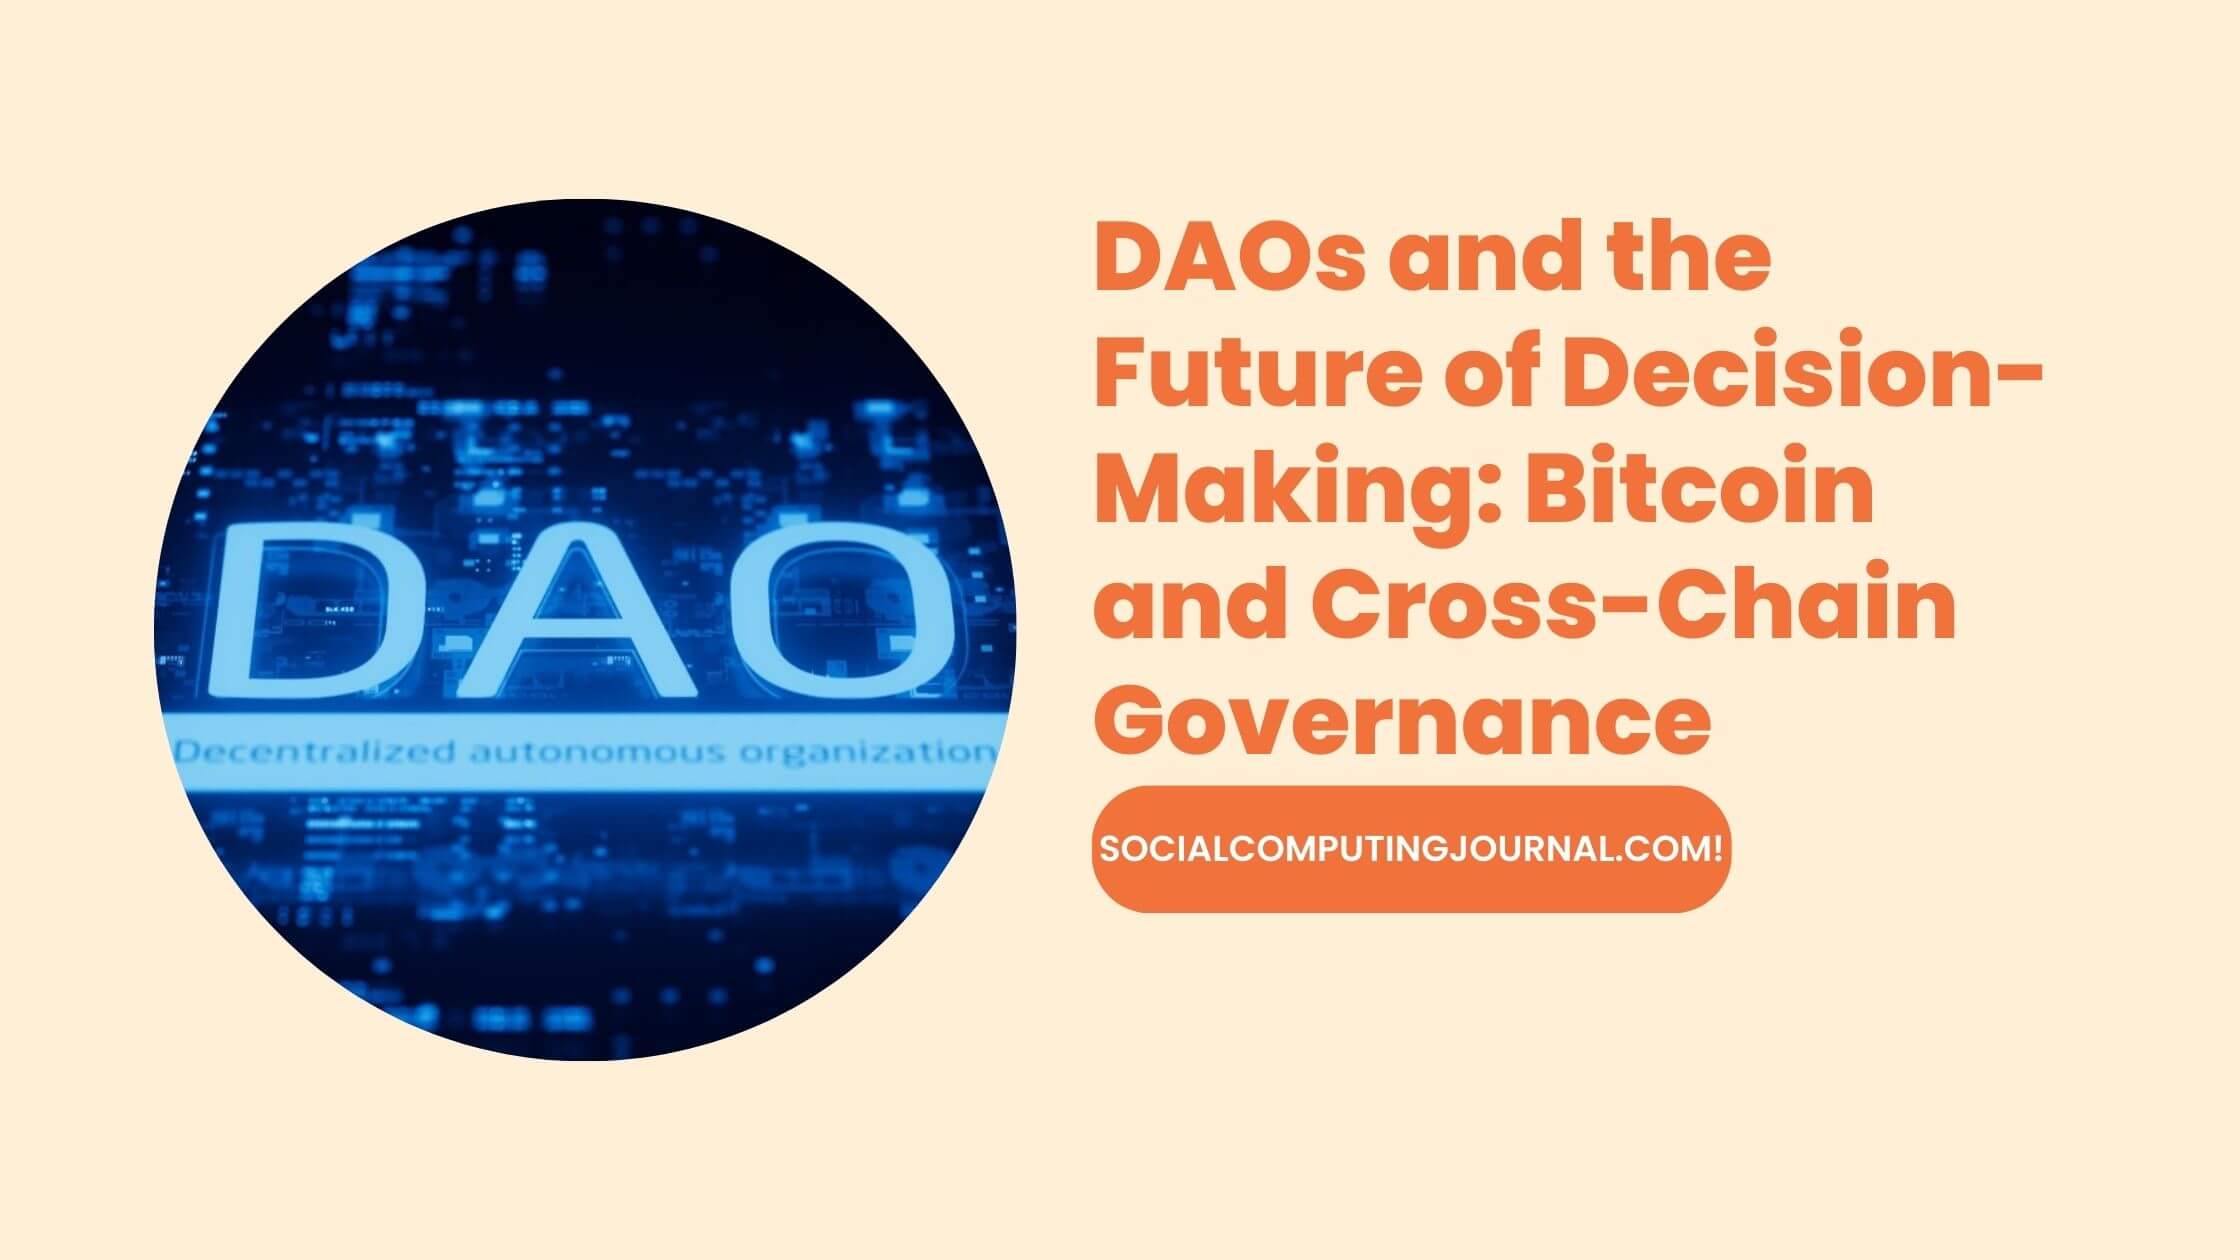 DAOs and the Future of Decision-Making Bitcoin and Cross-Chain Governance